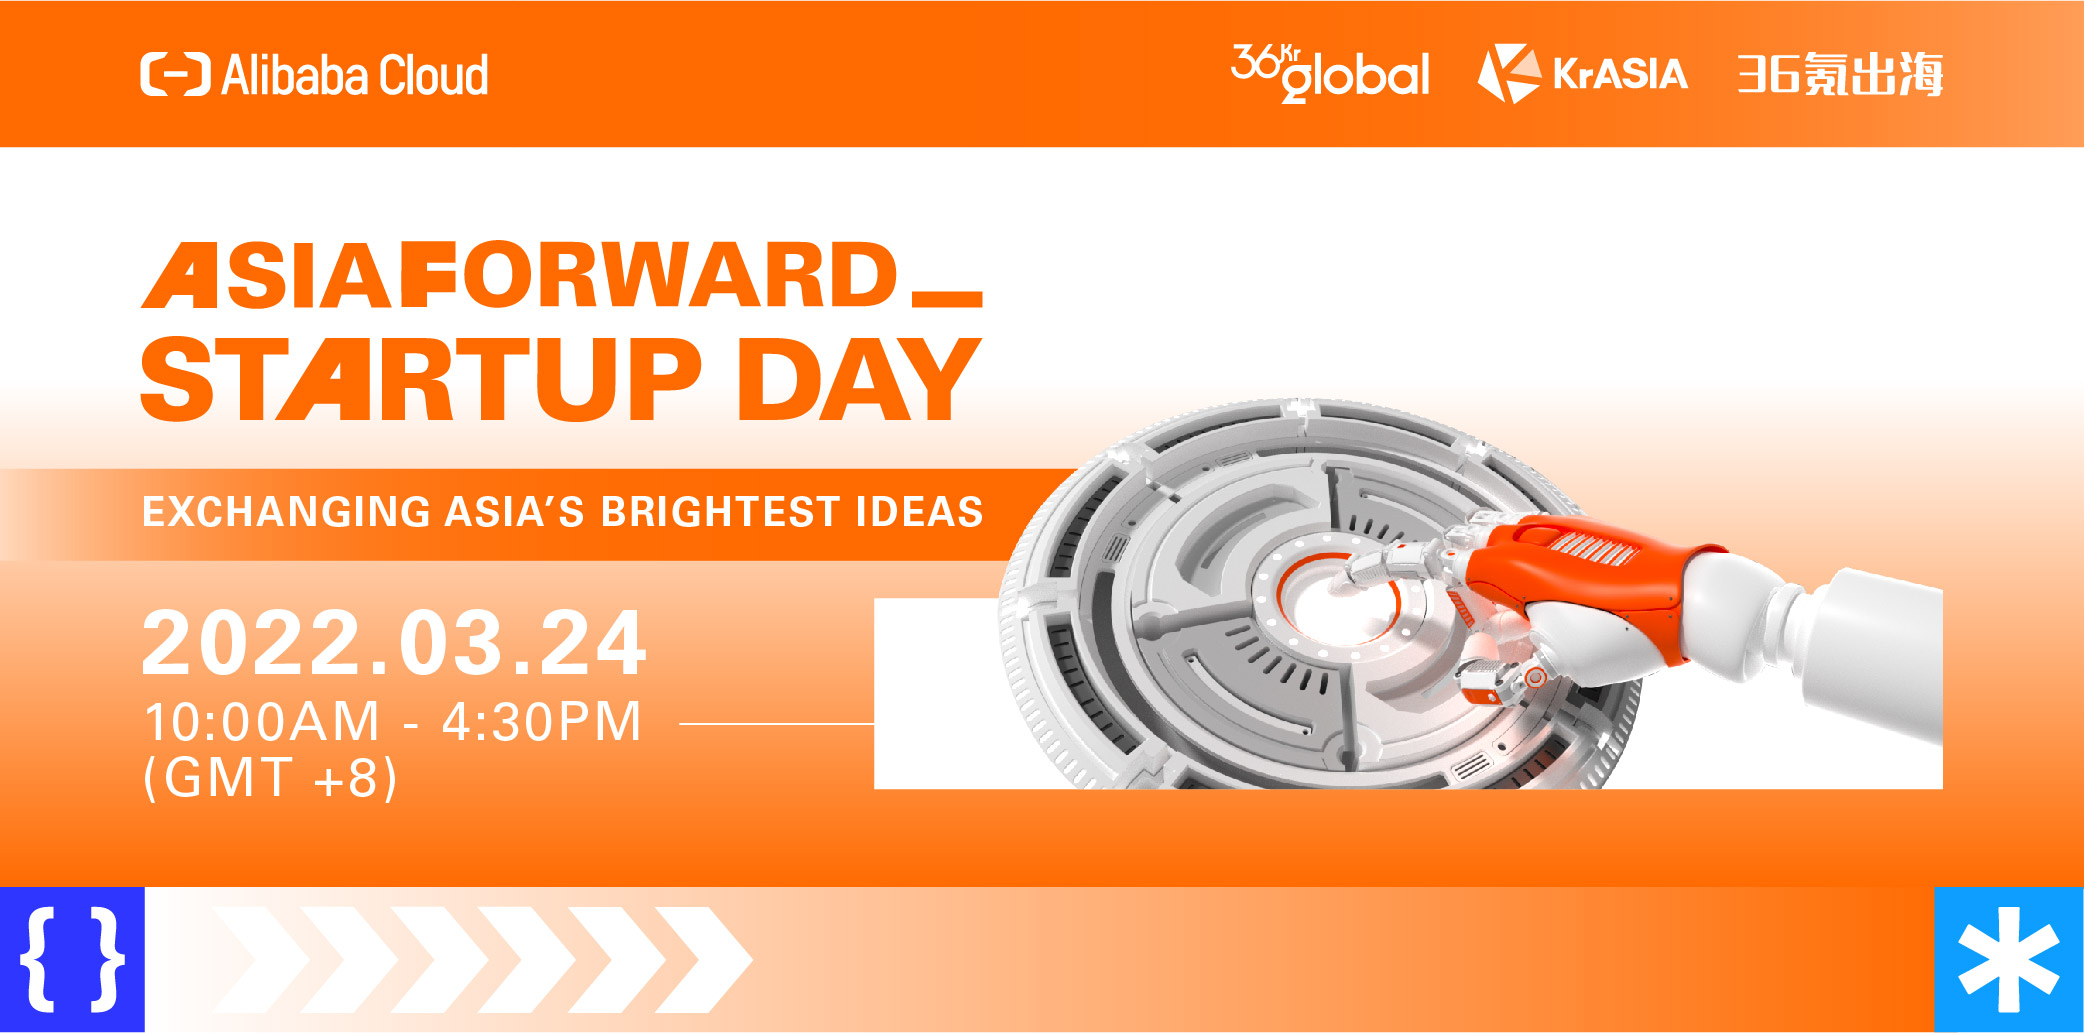 Alibaba Cloud presents AsiaForward Startup Day 2022: Exchanging Asia’s Brightest Ideas